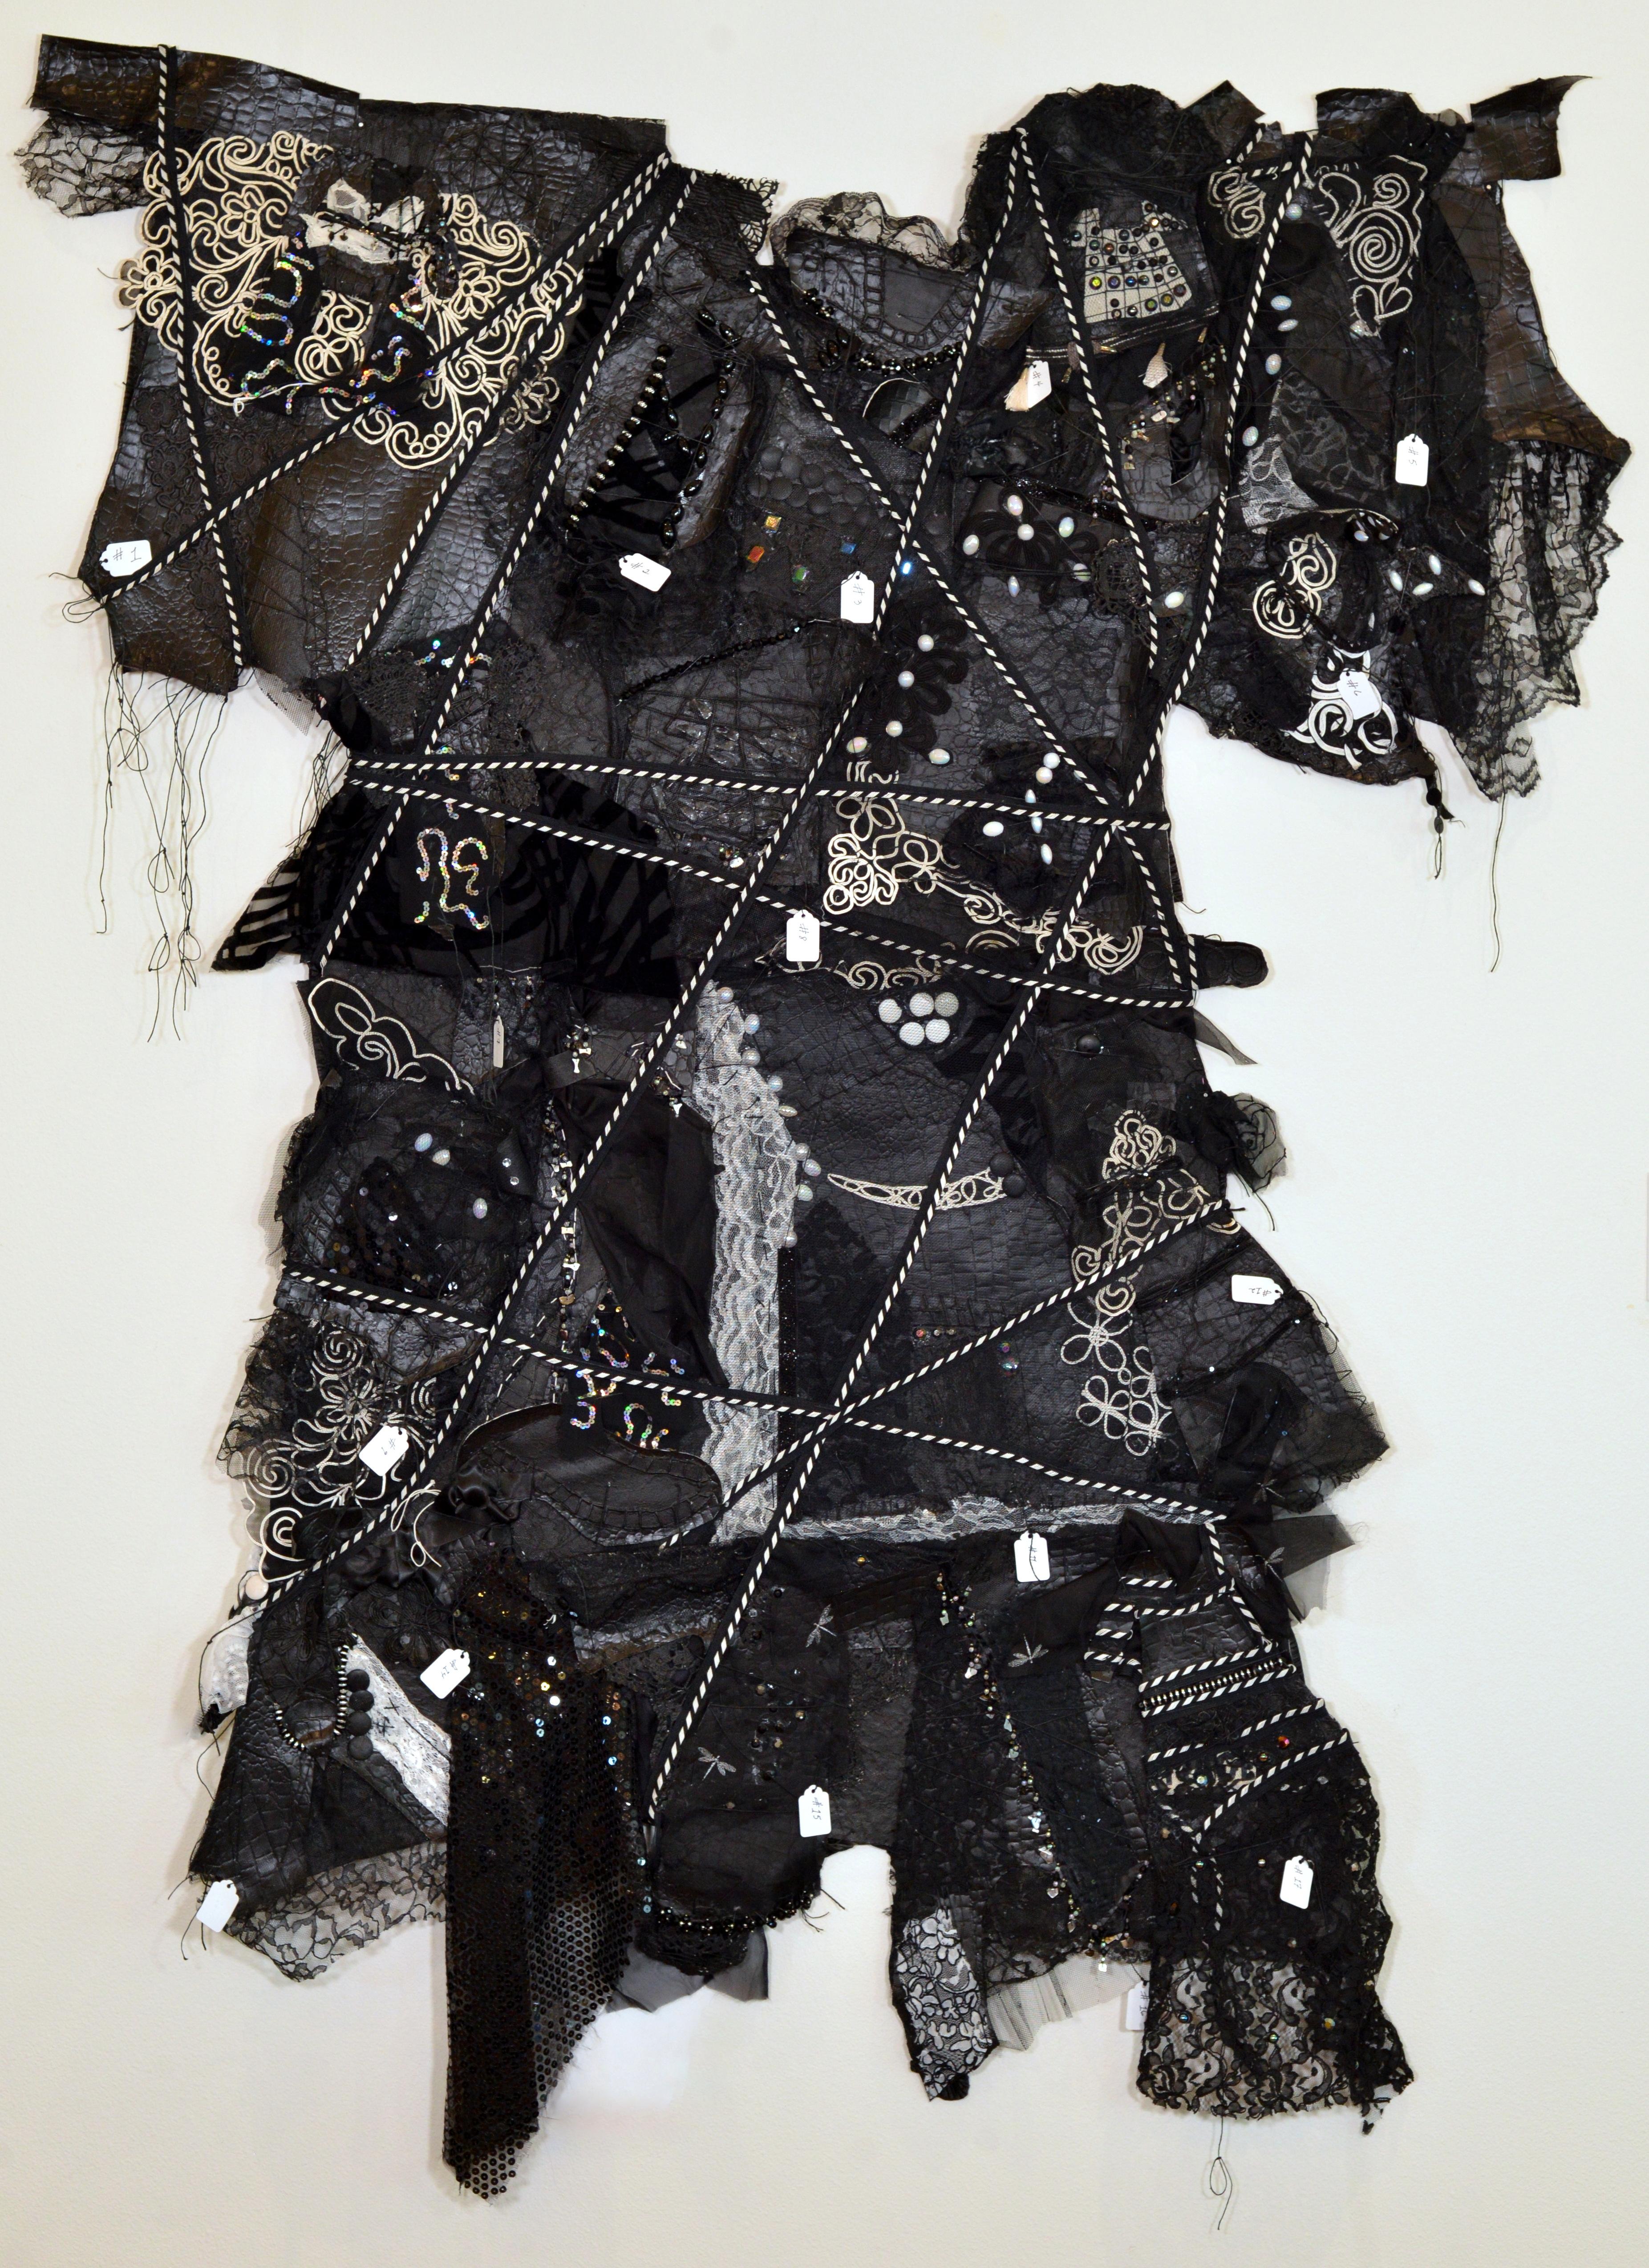 Remnants 3, Large Black dress with 17 small dresses sewn on - Mixed Media Art by Andrée Carter